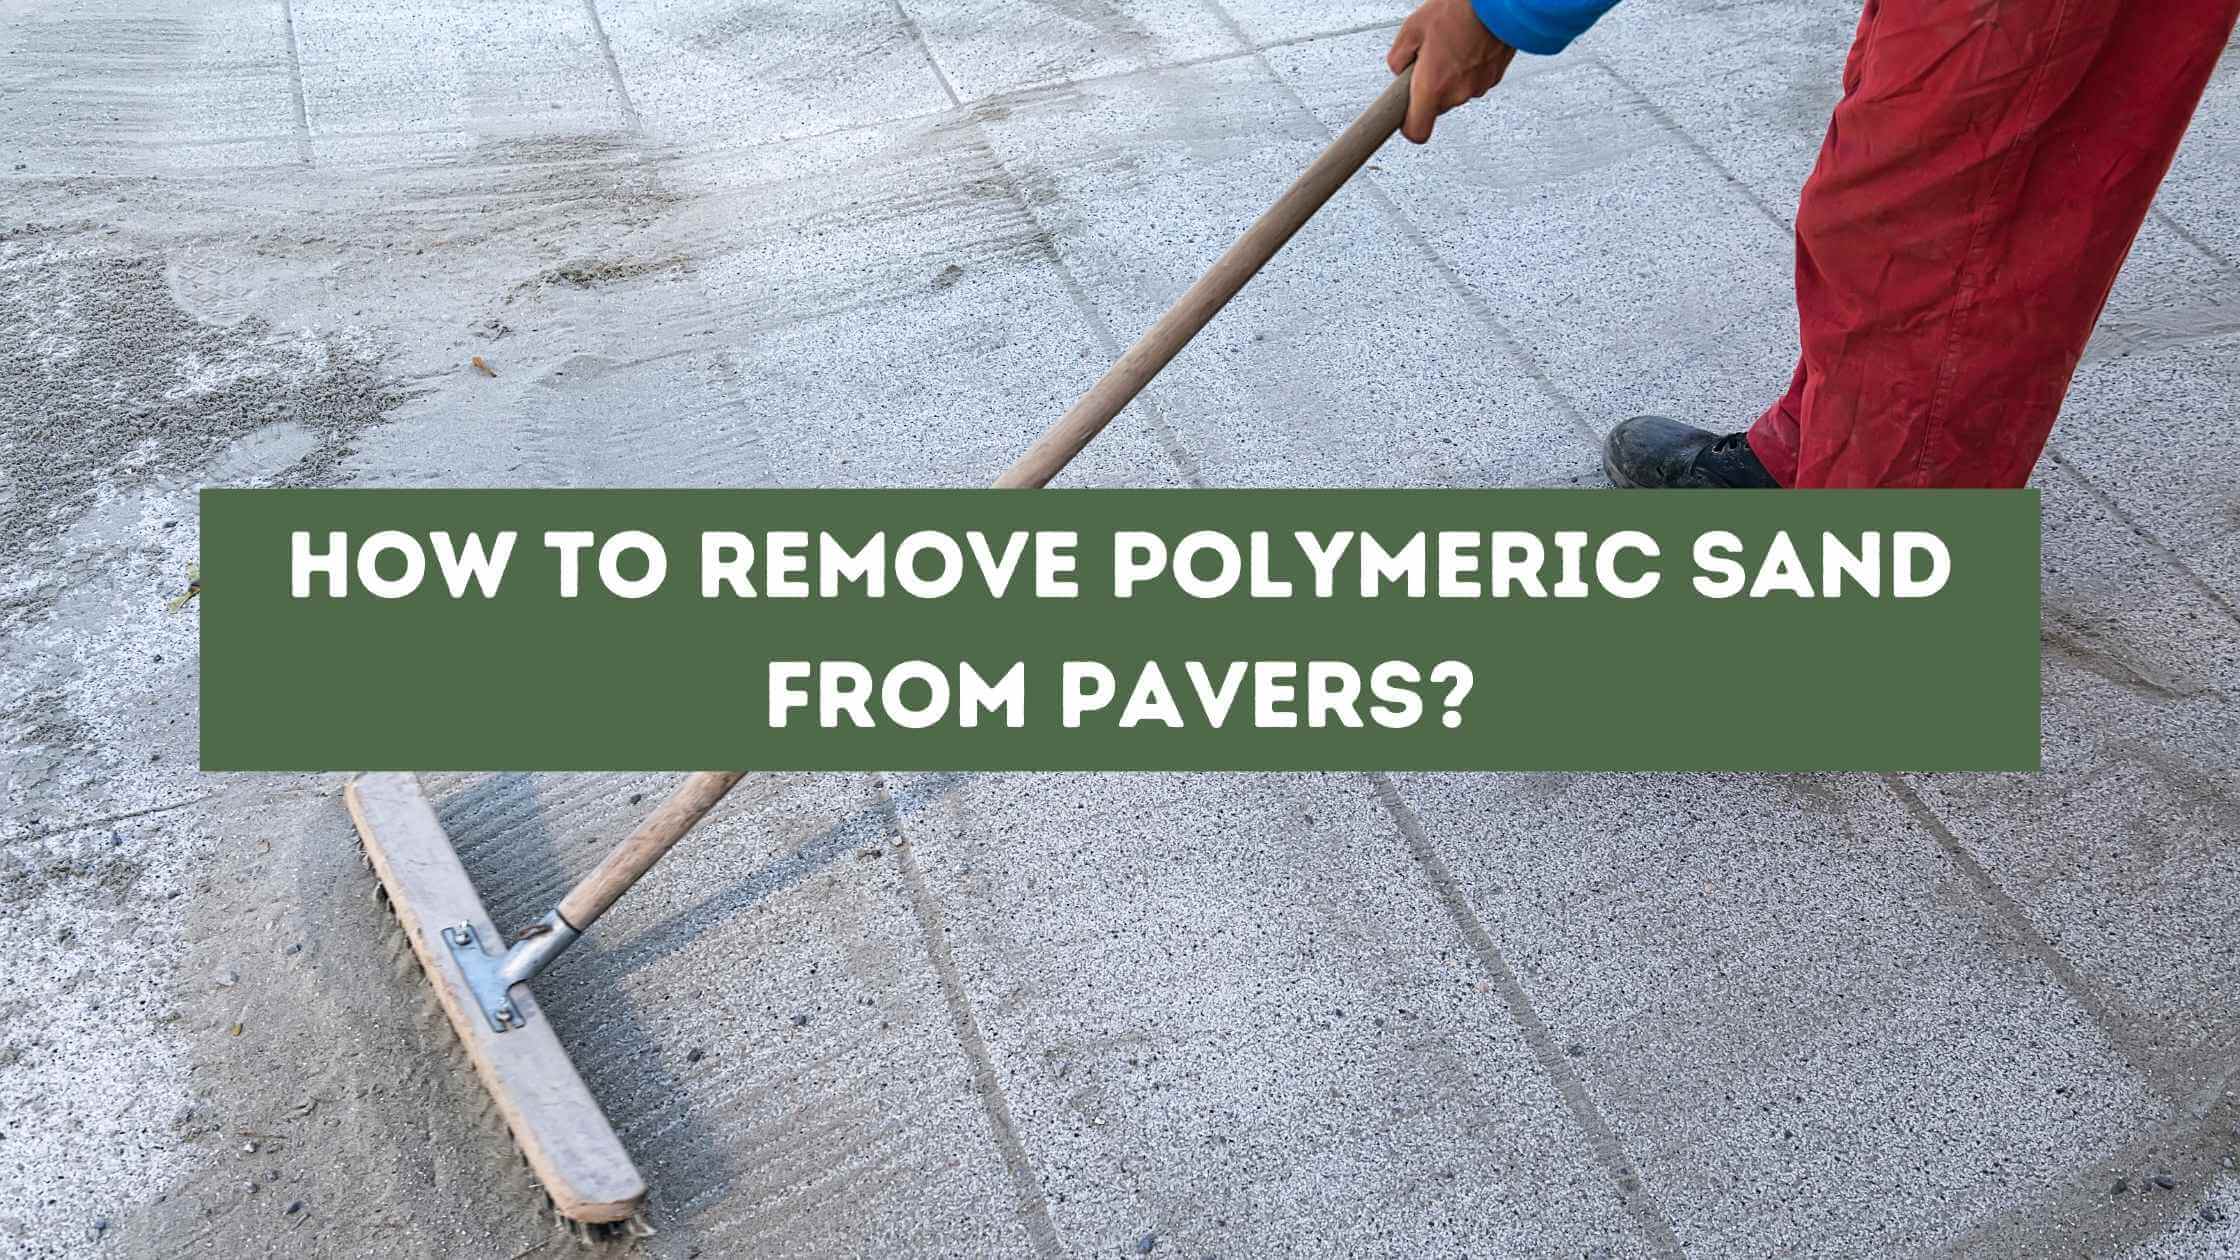 How to Remove Polymeric Sand from Pavers